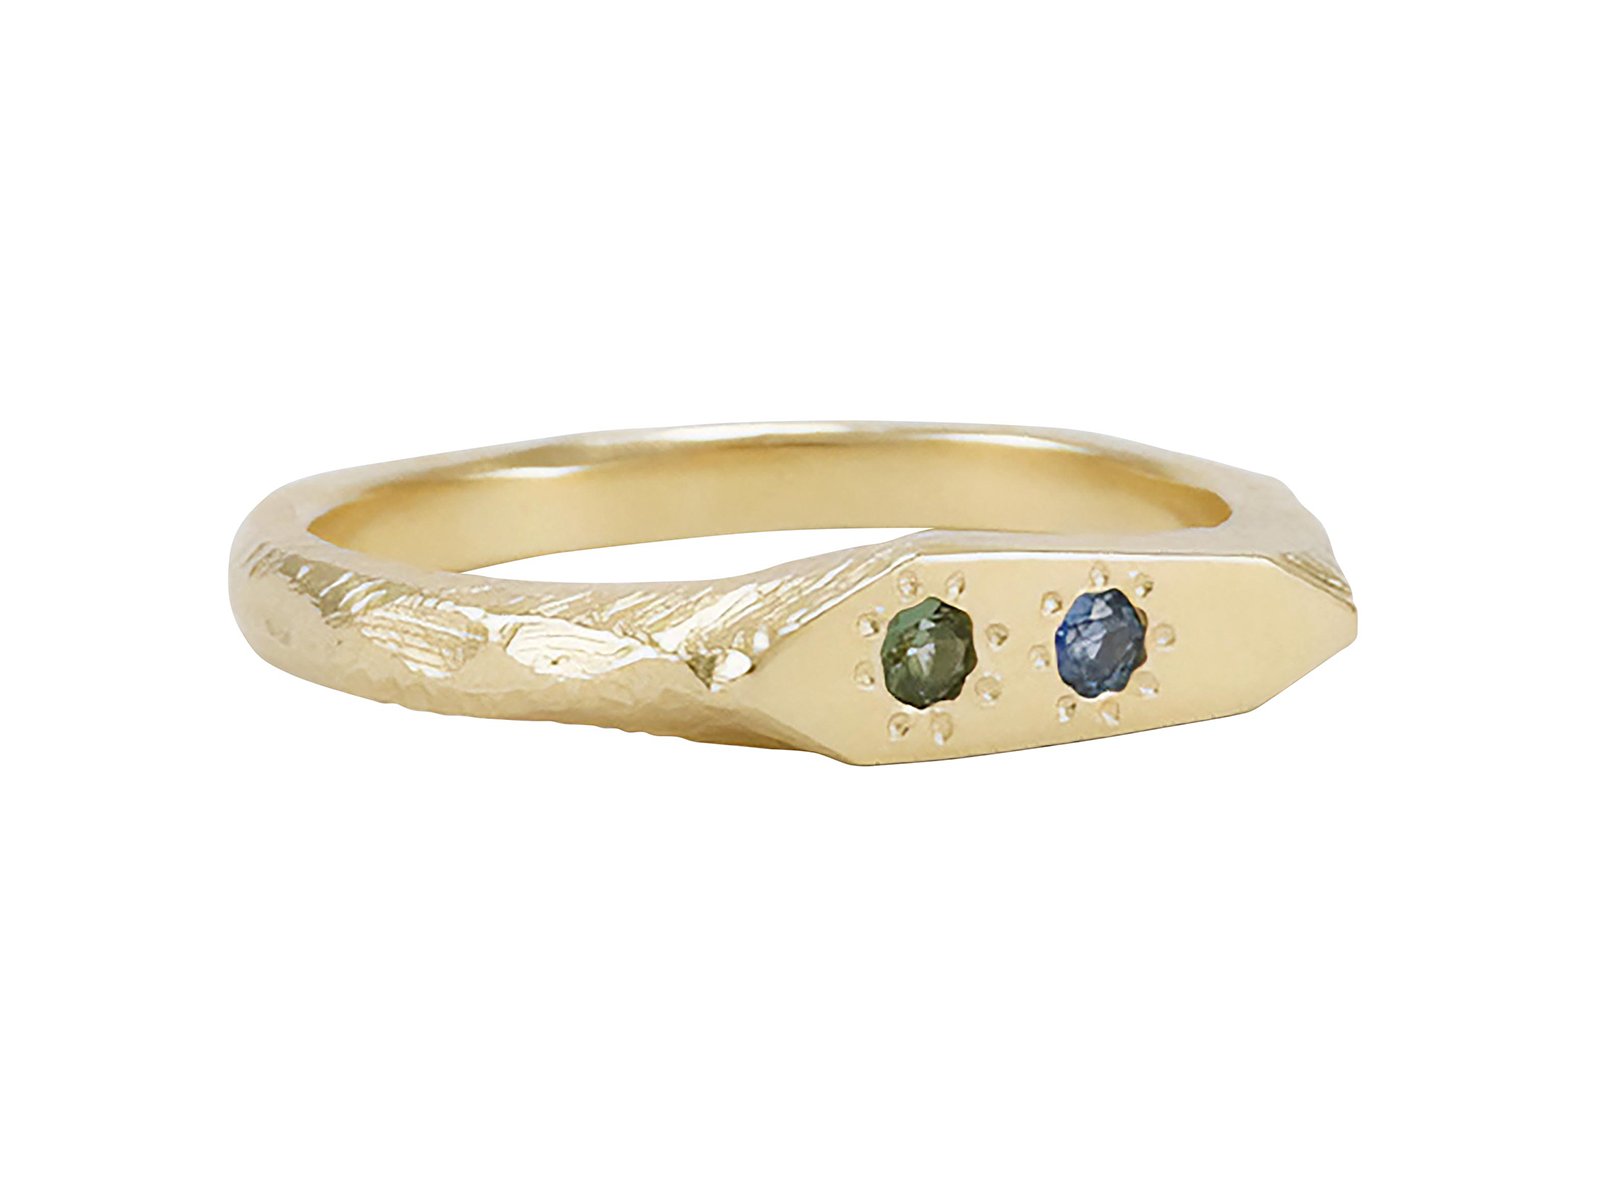 Alexandra Dodds Gemmy Mountain Signet - Gold ring with green and blue sapphire gemstones